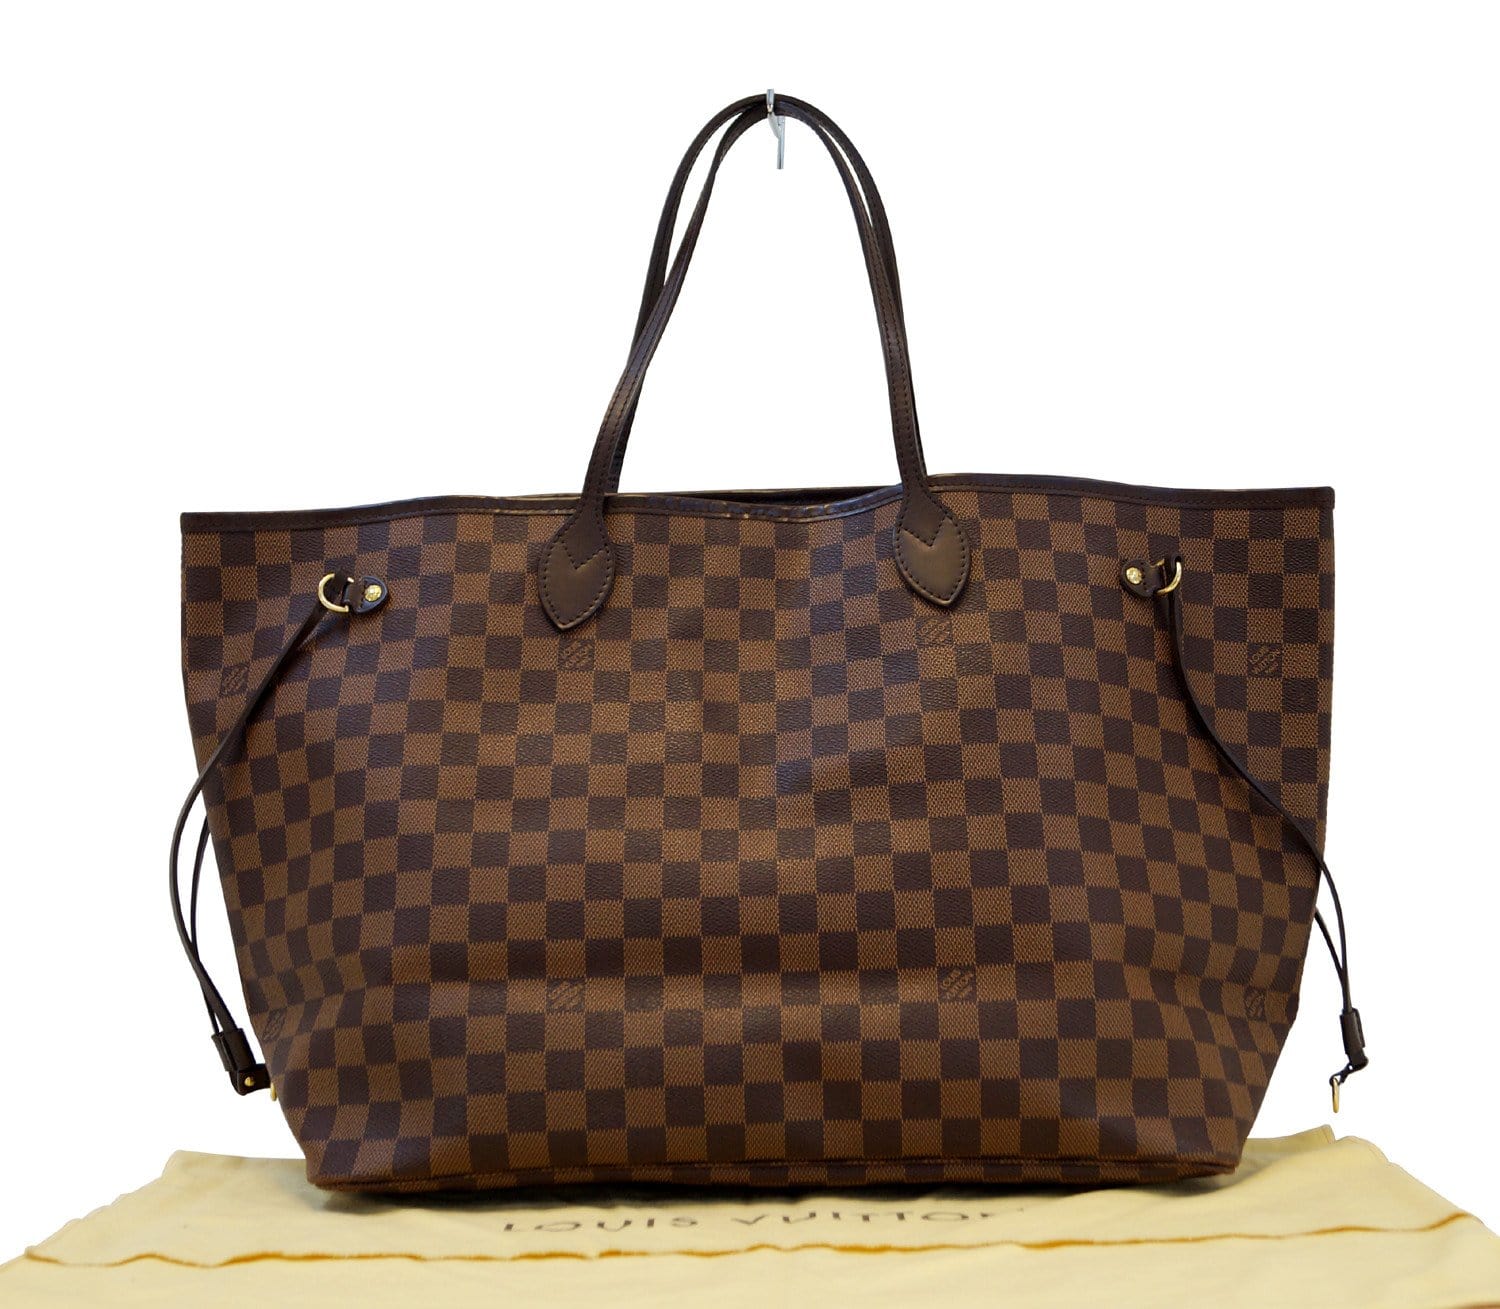 Louis Vuitton Never full GM Bag 100% Authentic Used for Sale in